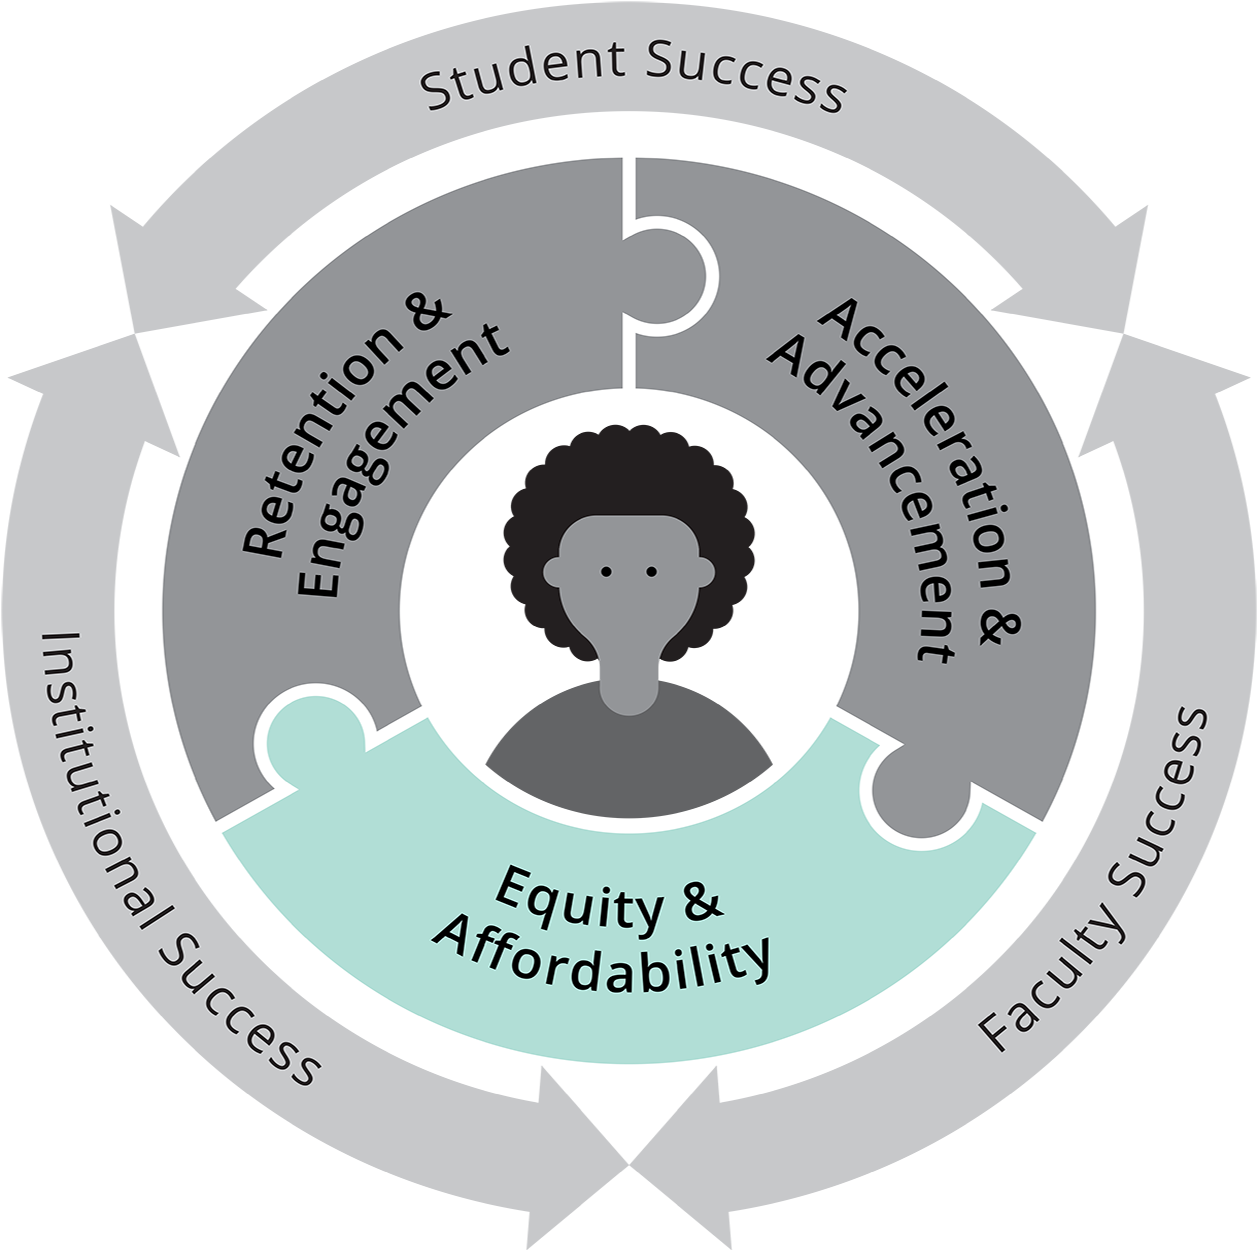 Gray circle graphic with "Student, Institutional, and Faculty Success" written on the outer ring. The middle ring is three connecting puzzle pieces that read: Retention & Engagnement, Acceleration & Advancement, and Equity & Affordability. In the center is an image of a student. Equity & Affordability piece stands out in blue.